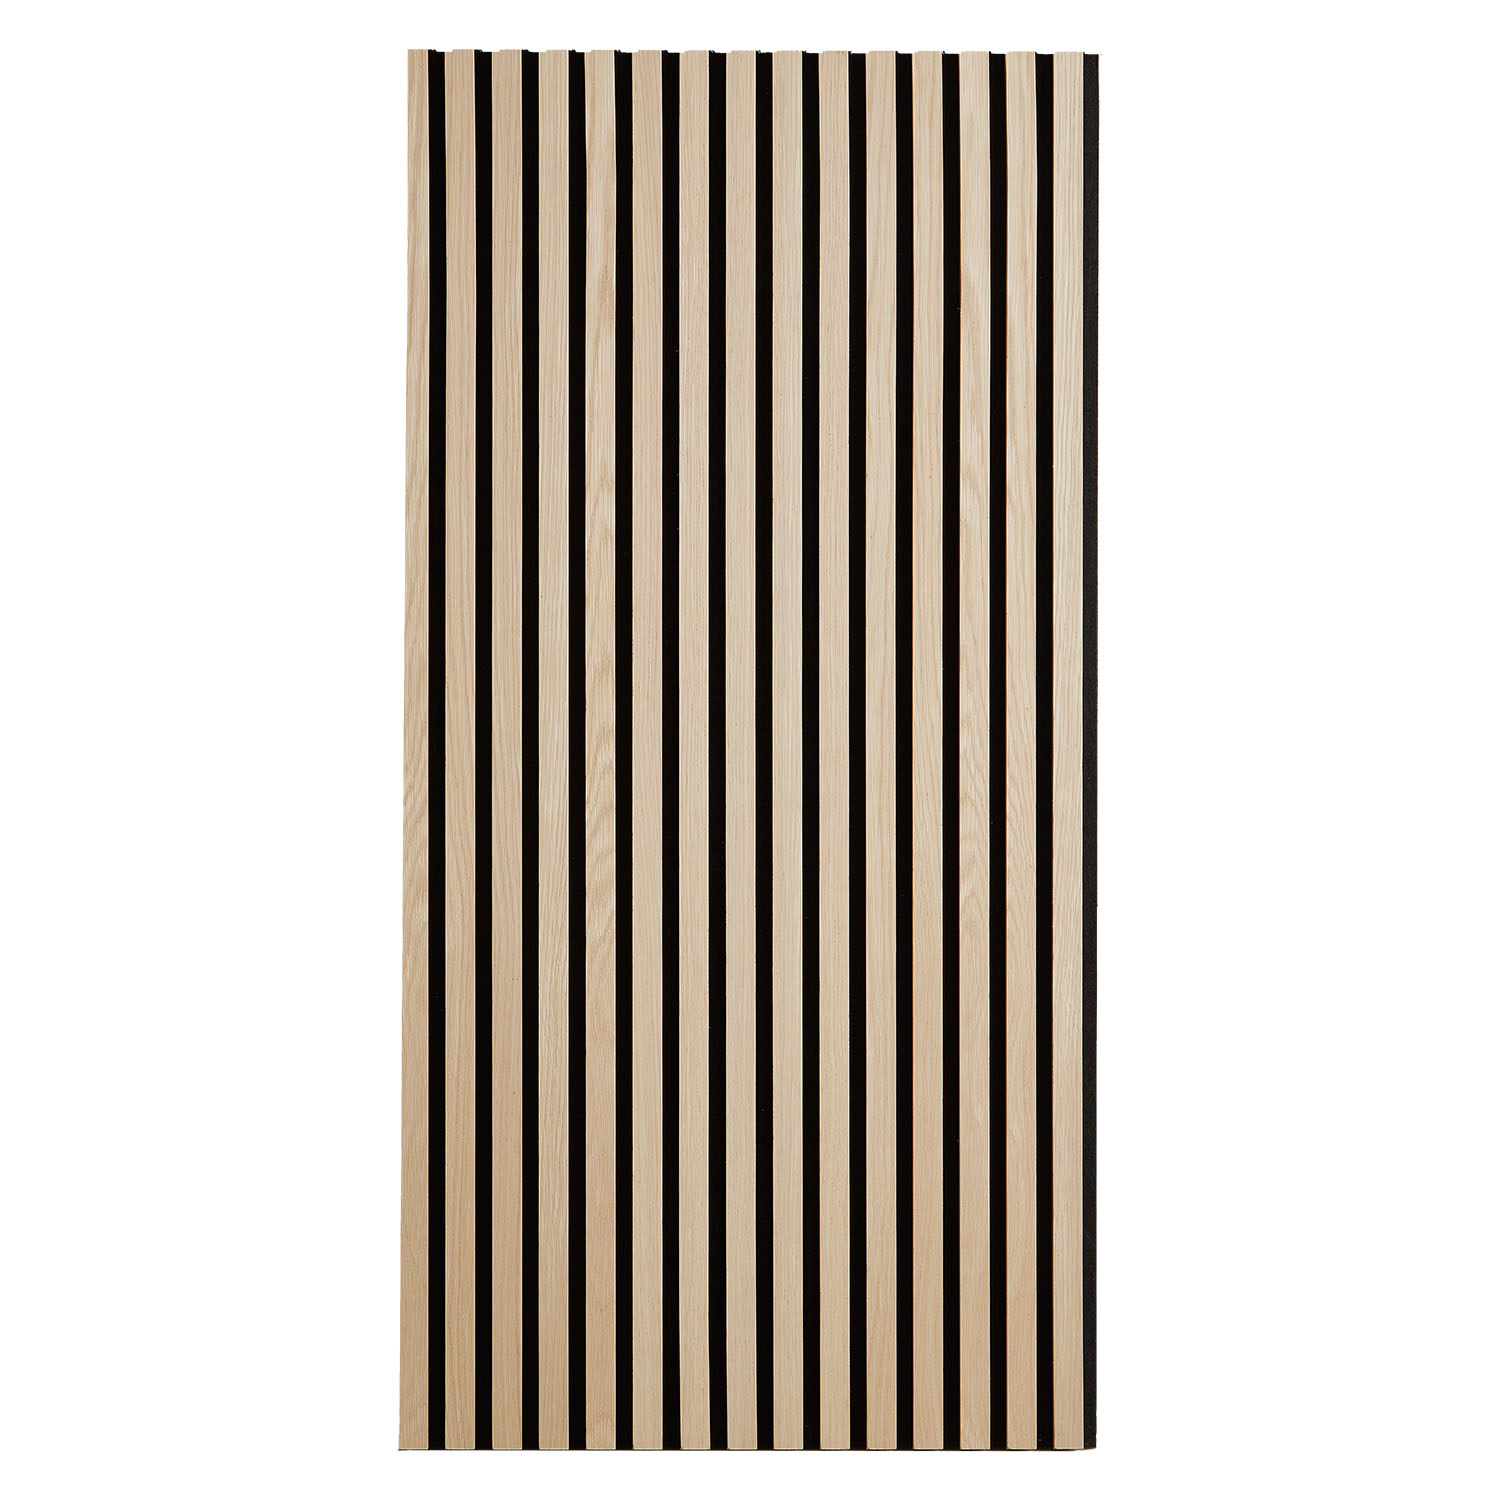 1, 2 or 4 Wall panels 60 x 120 cm Natural wood paneling for walls Acoustic panels Bedroom paneling Wall cladding Acoustic sound panels Sound proof panels